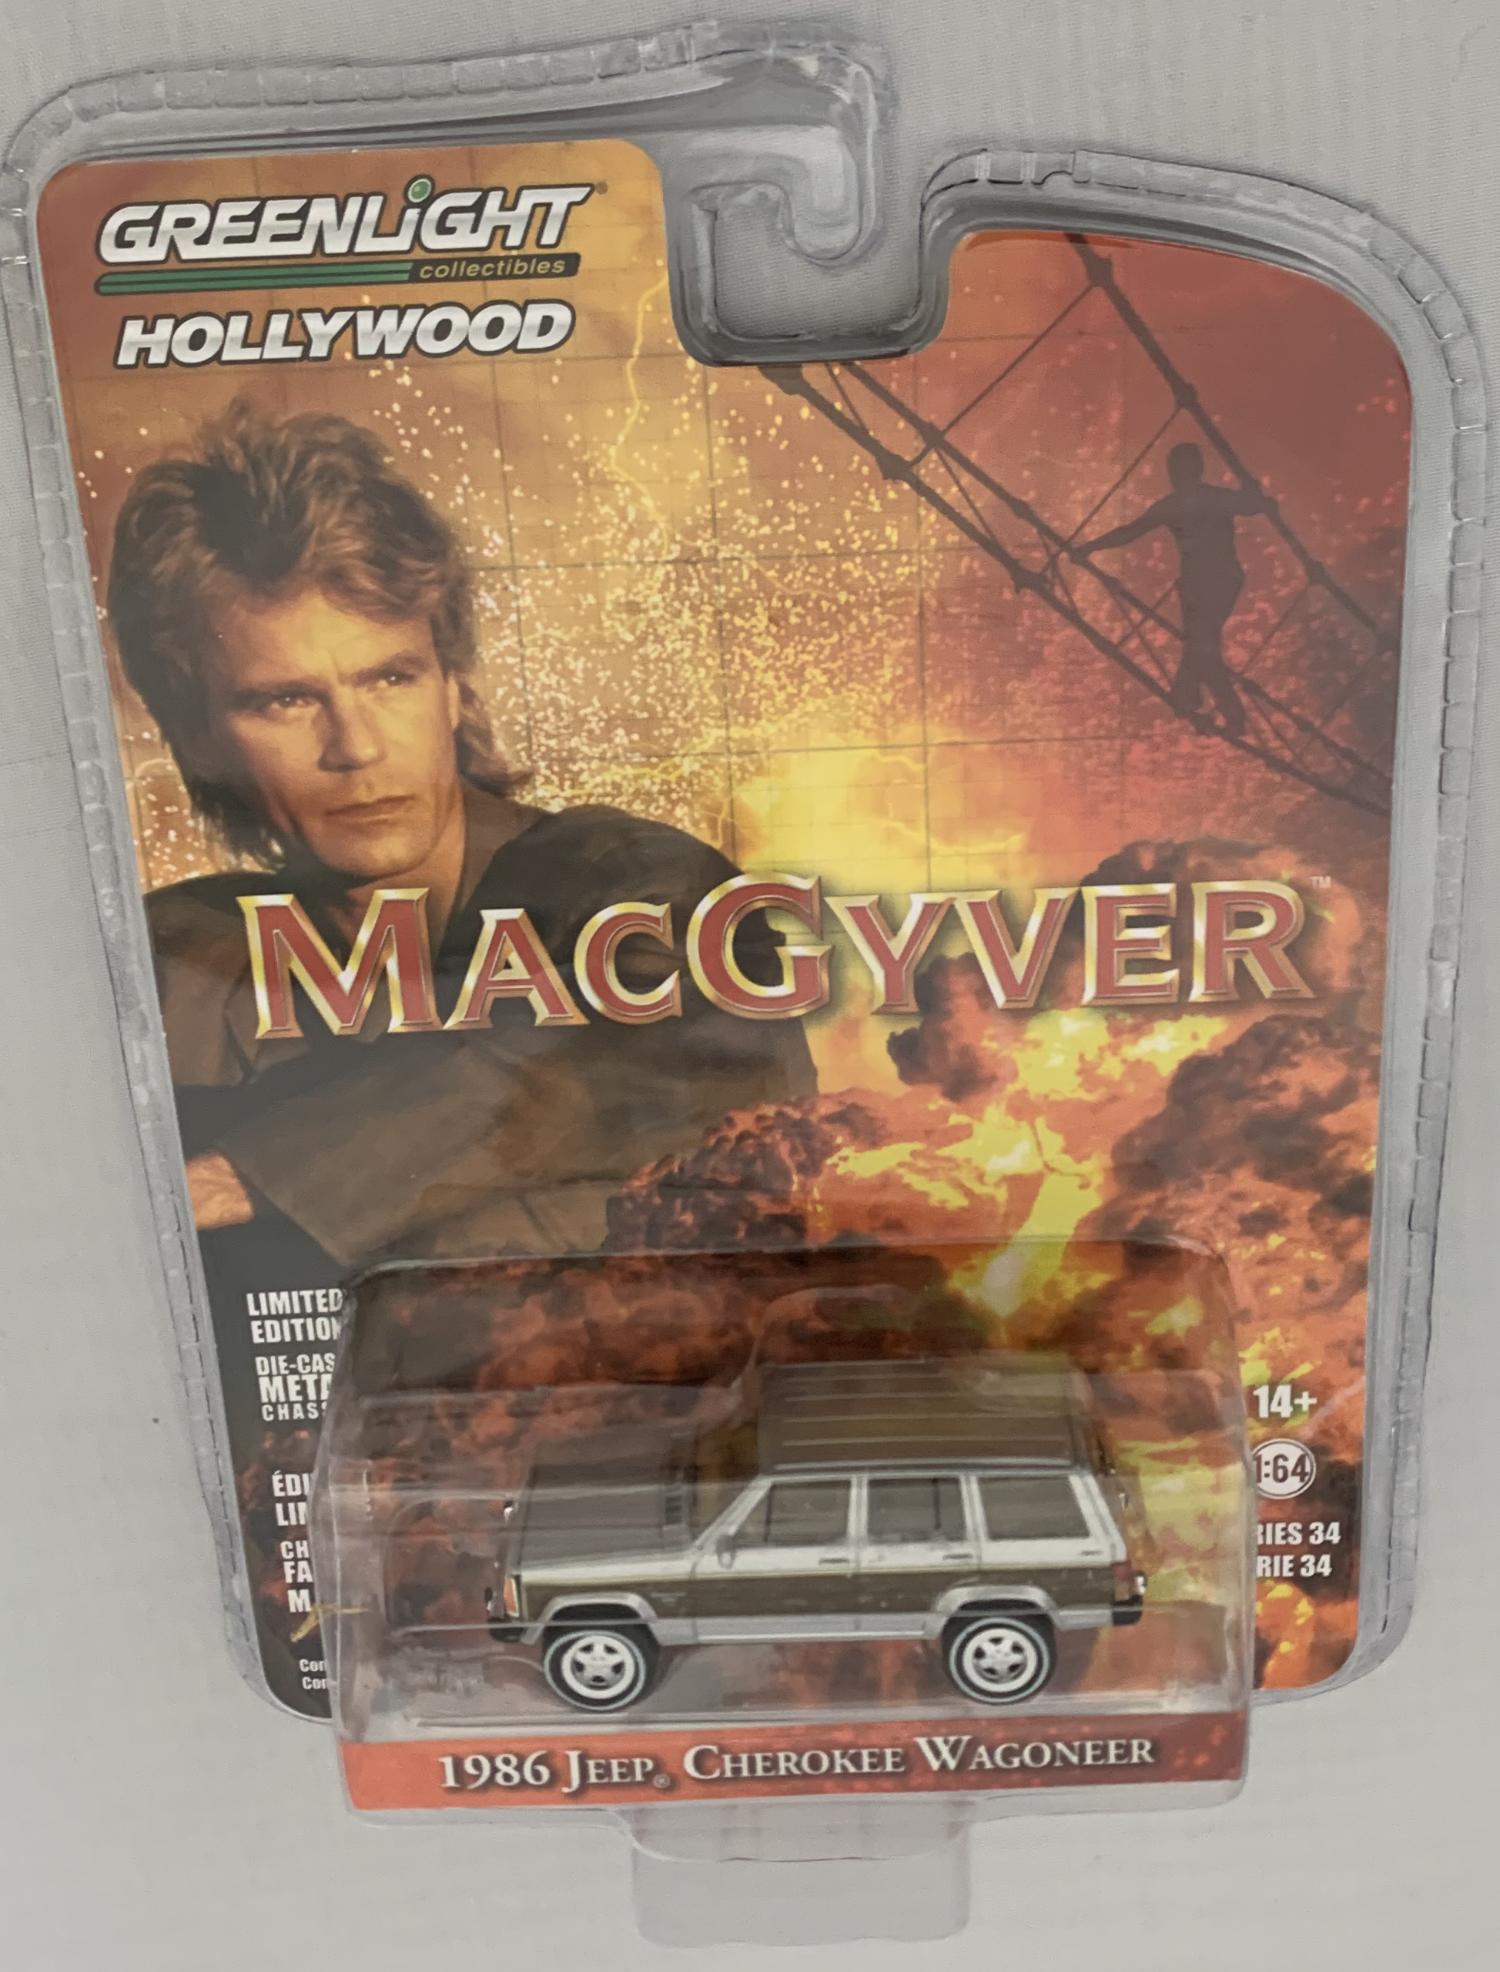 From the TV series 'MacGyver' 1986 Jeep Cherokee Wagoneer in silver 1:64 scale model from Greenlight, limited edition